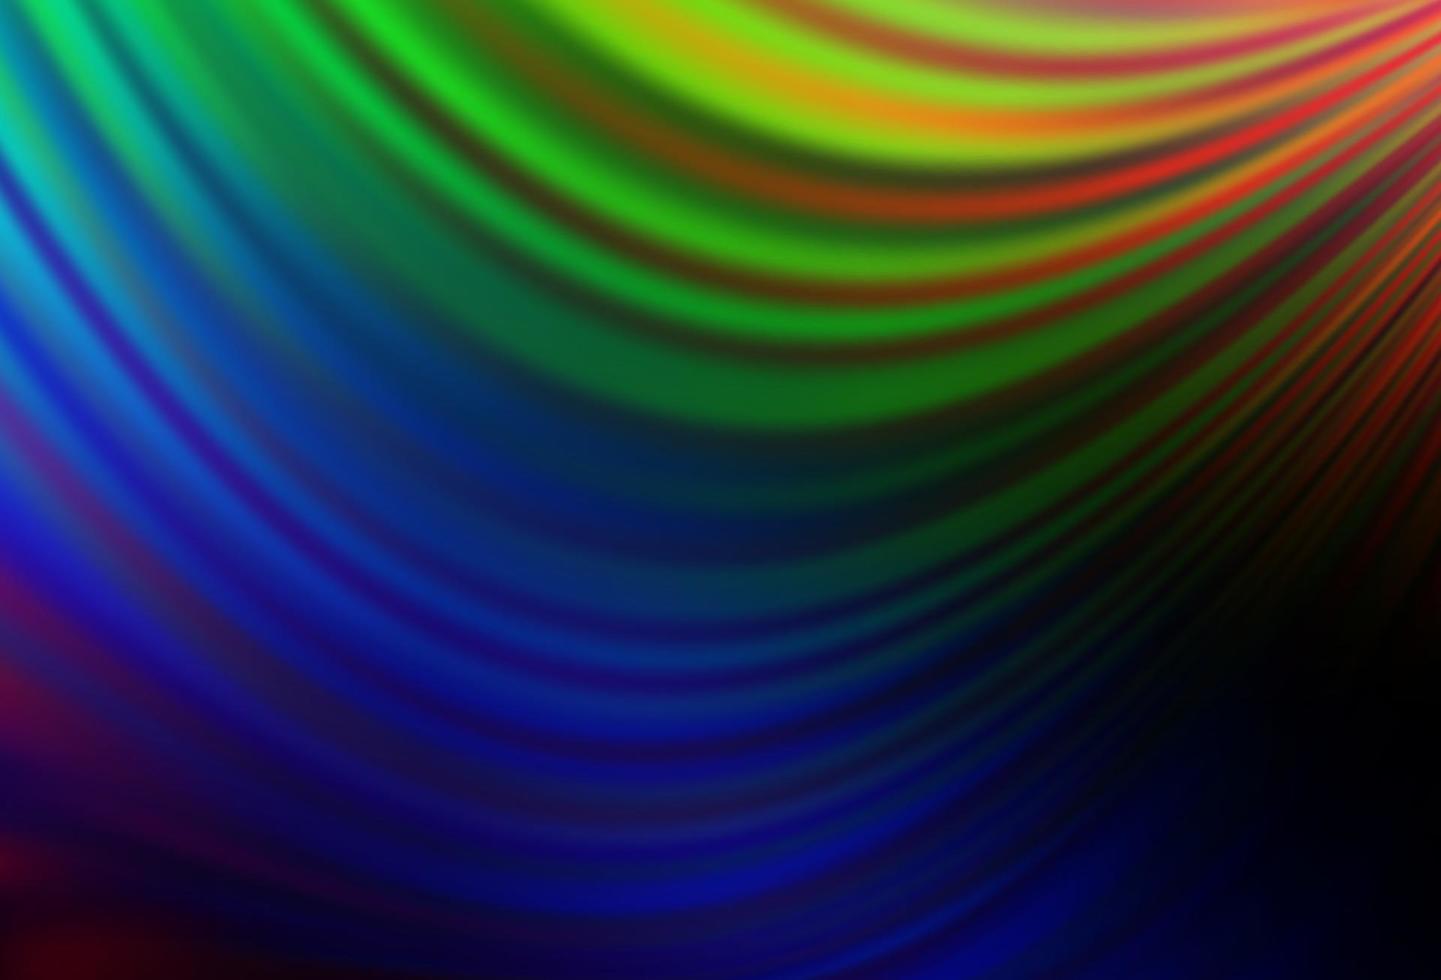 Dark Multicolor, Rainbow vector pattern with curved circles.